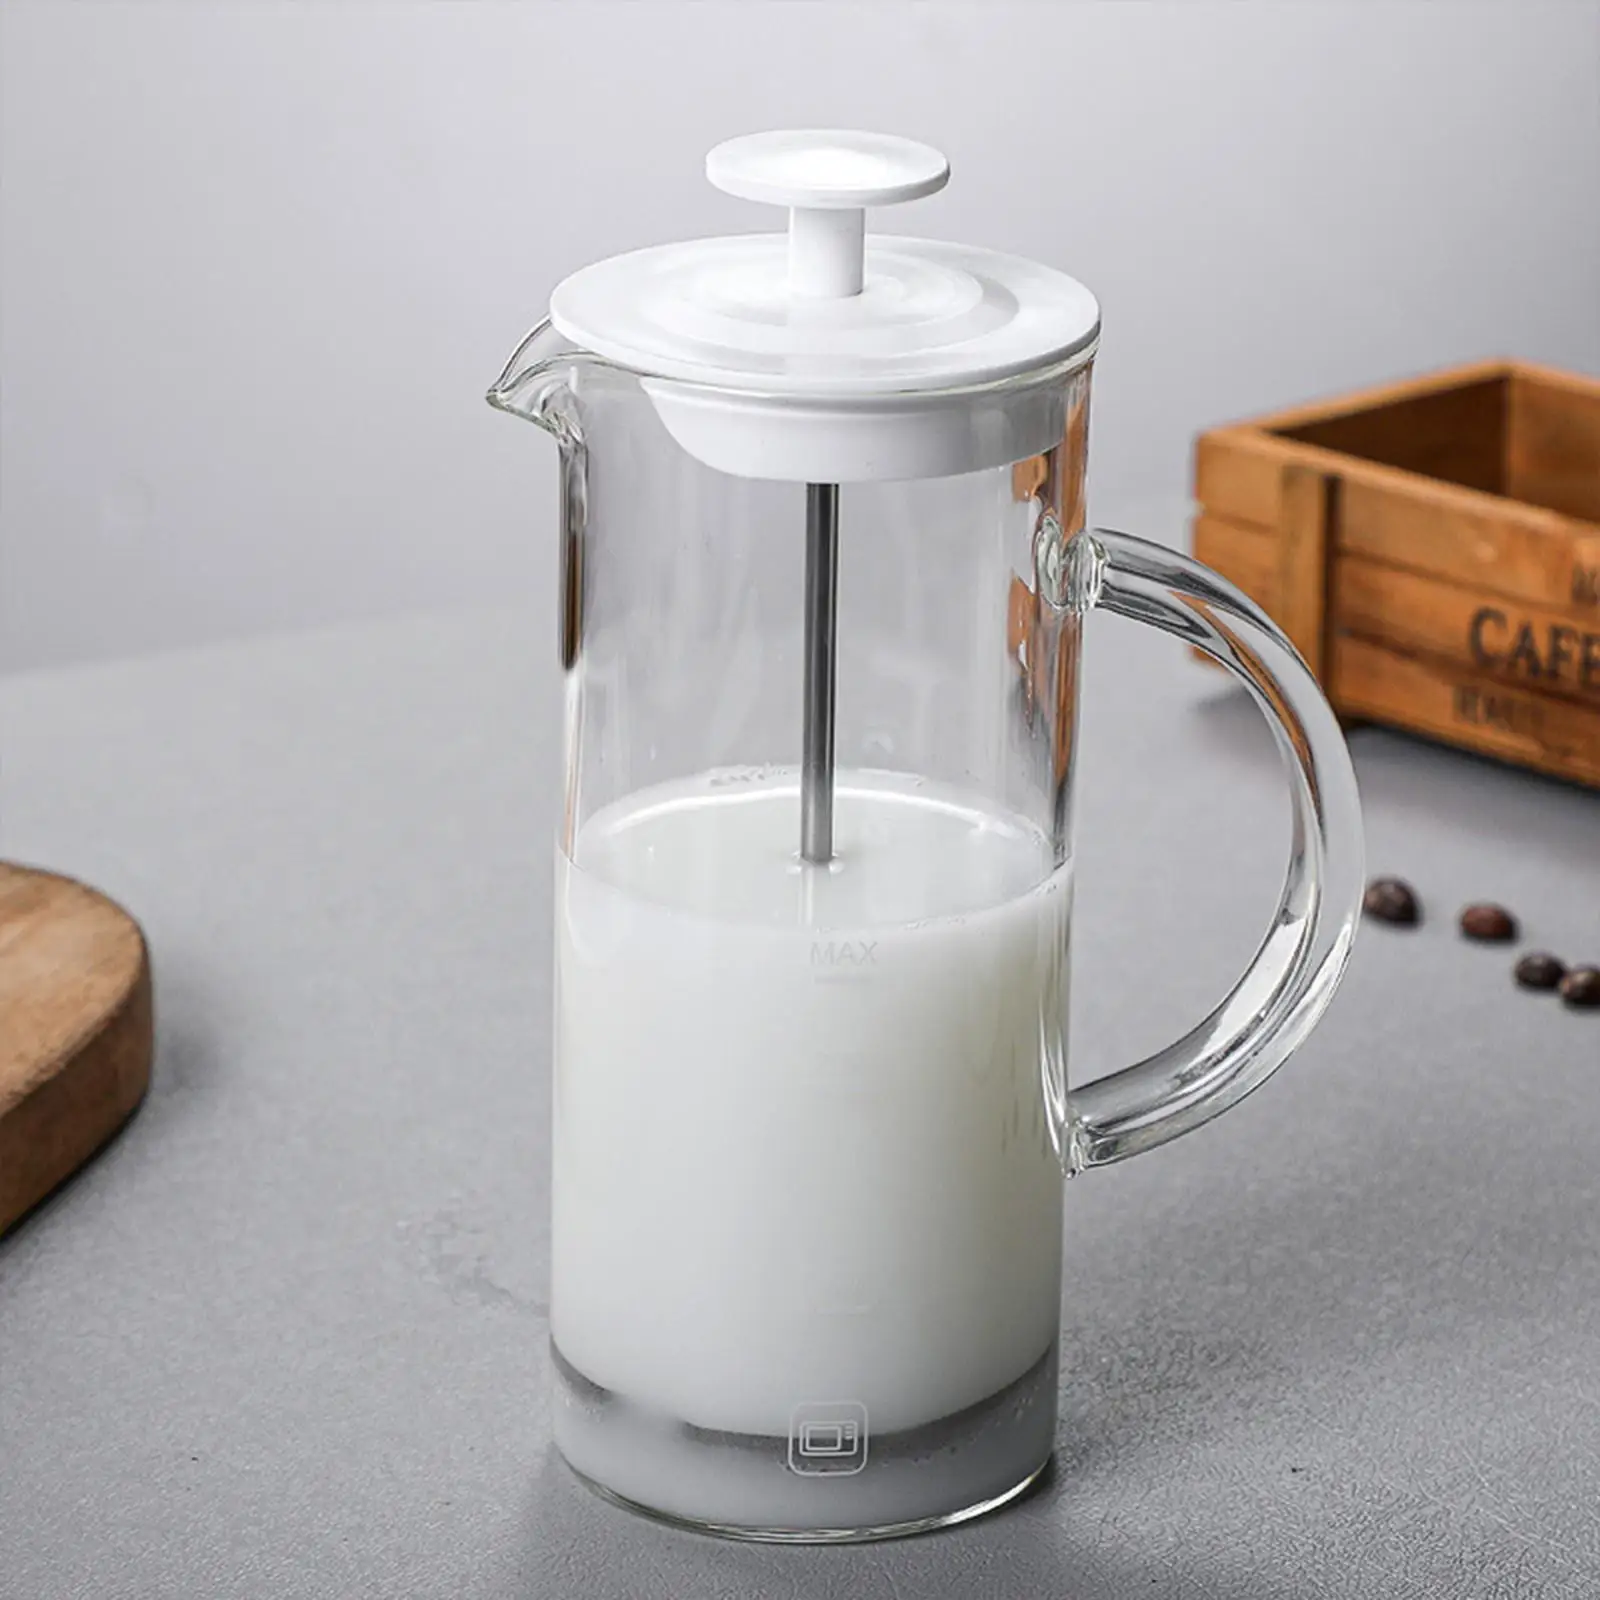  Coffee Maker Multifunctional 16 Ounce Milk Frother for Tea Milk Home Kitchen Pot